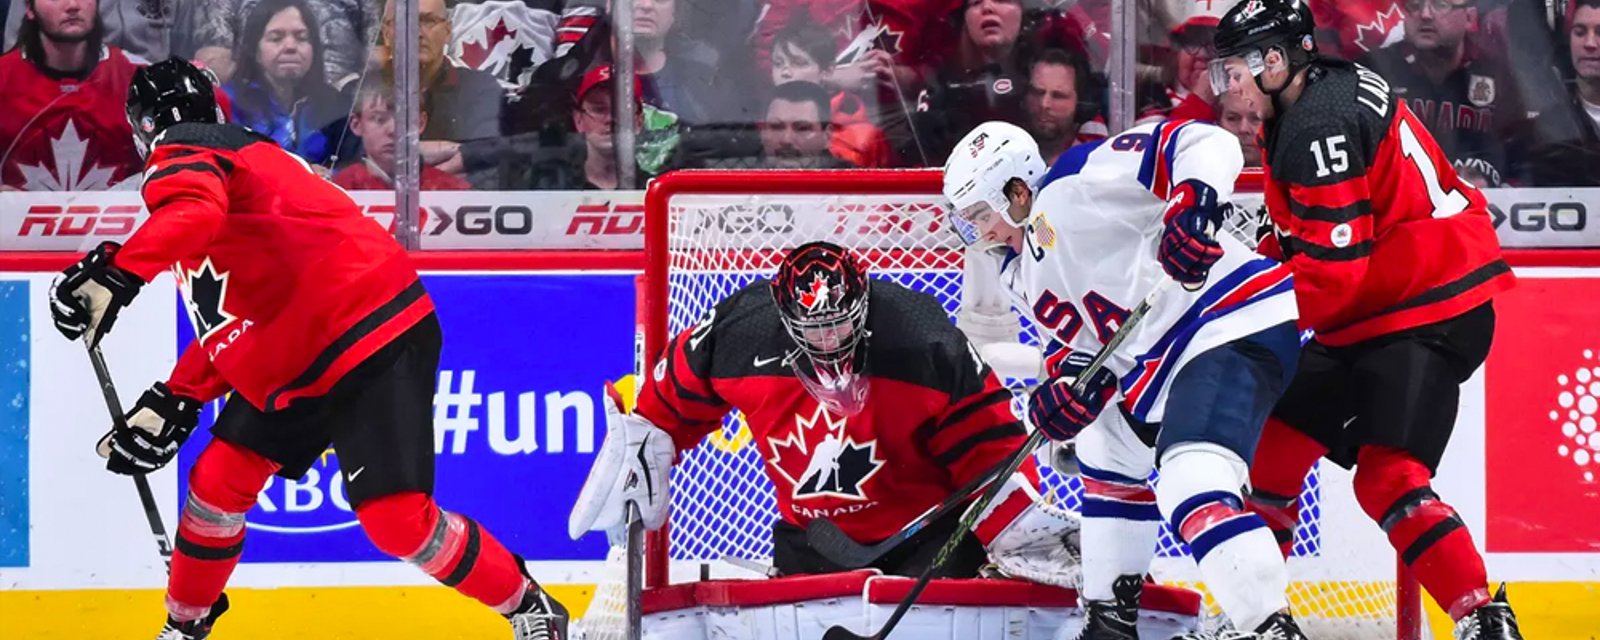 World Junior Championships may be cancelled after Team Canada forced into quarantine